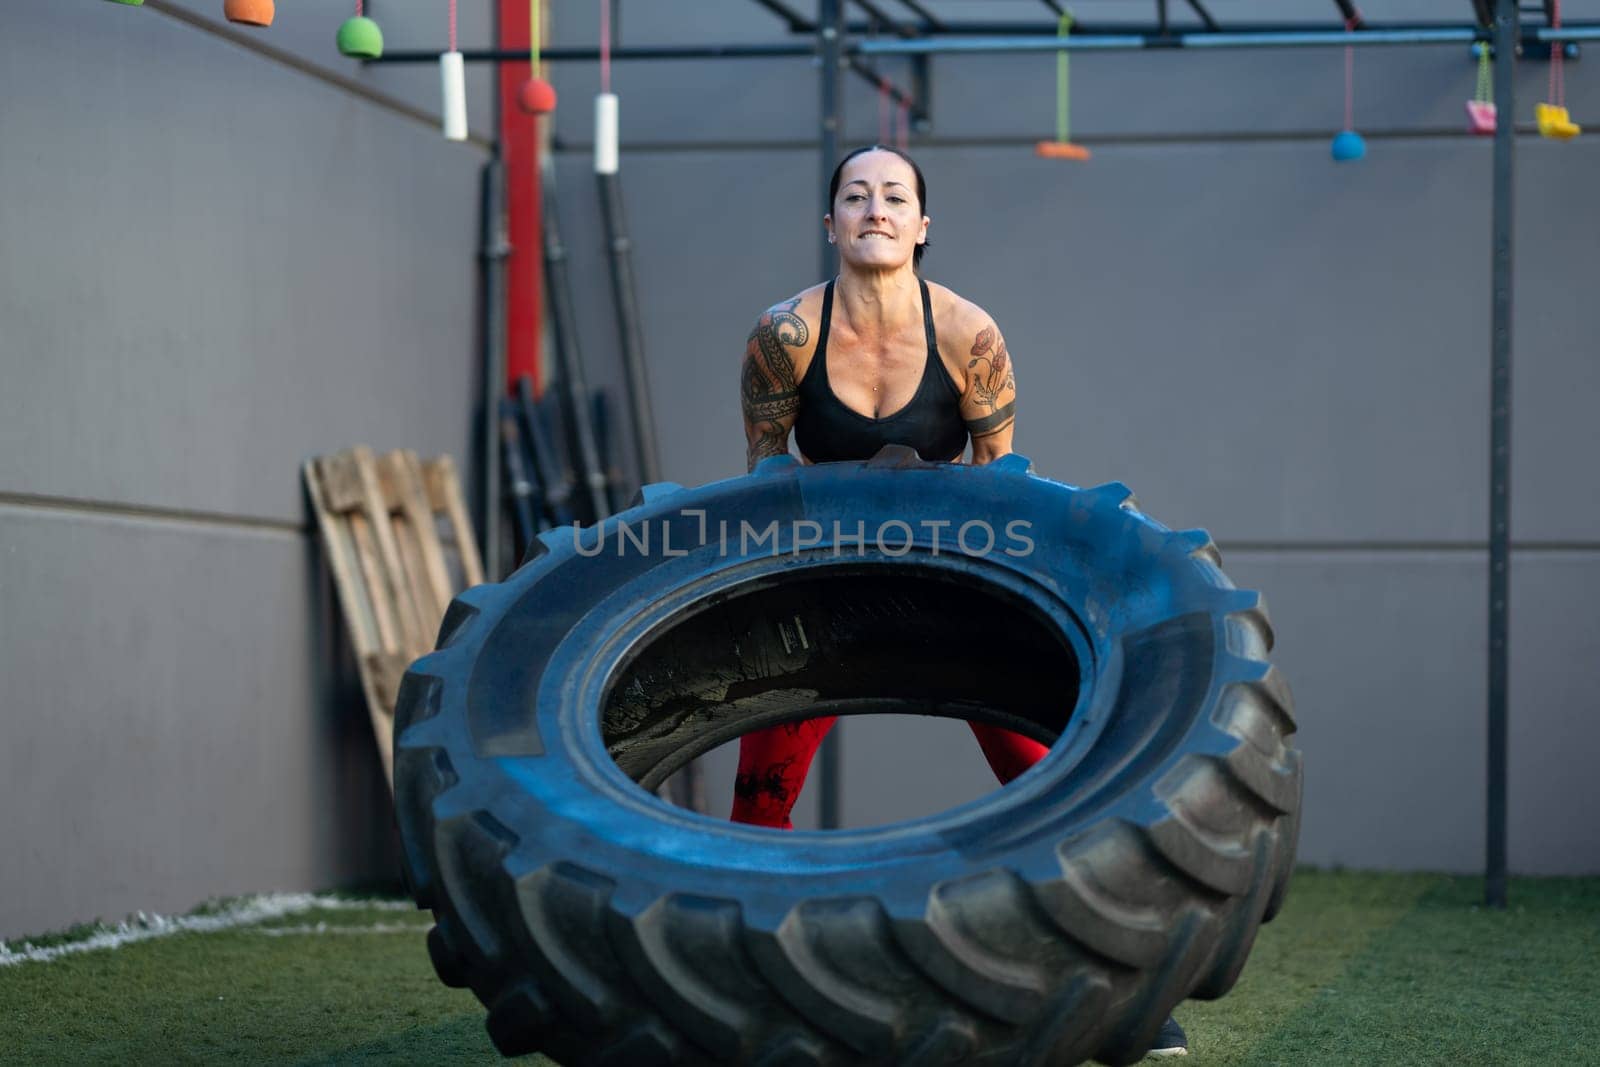 Frontal photo of a strong mature woman lifting a wheel in a gym